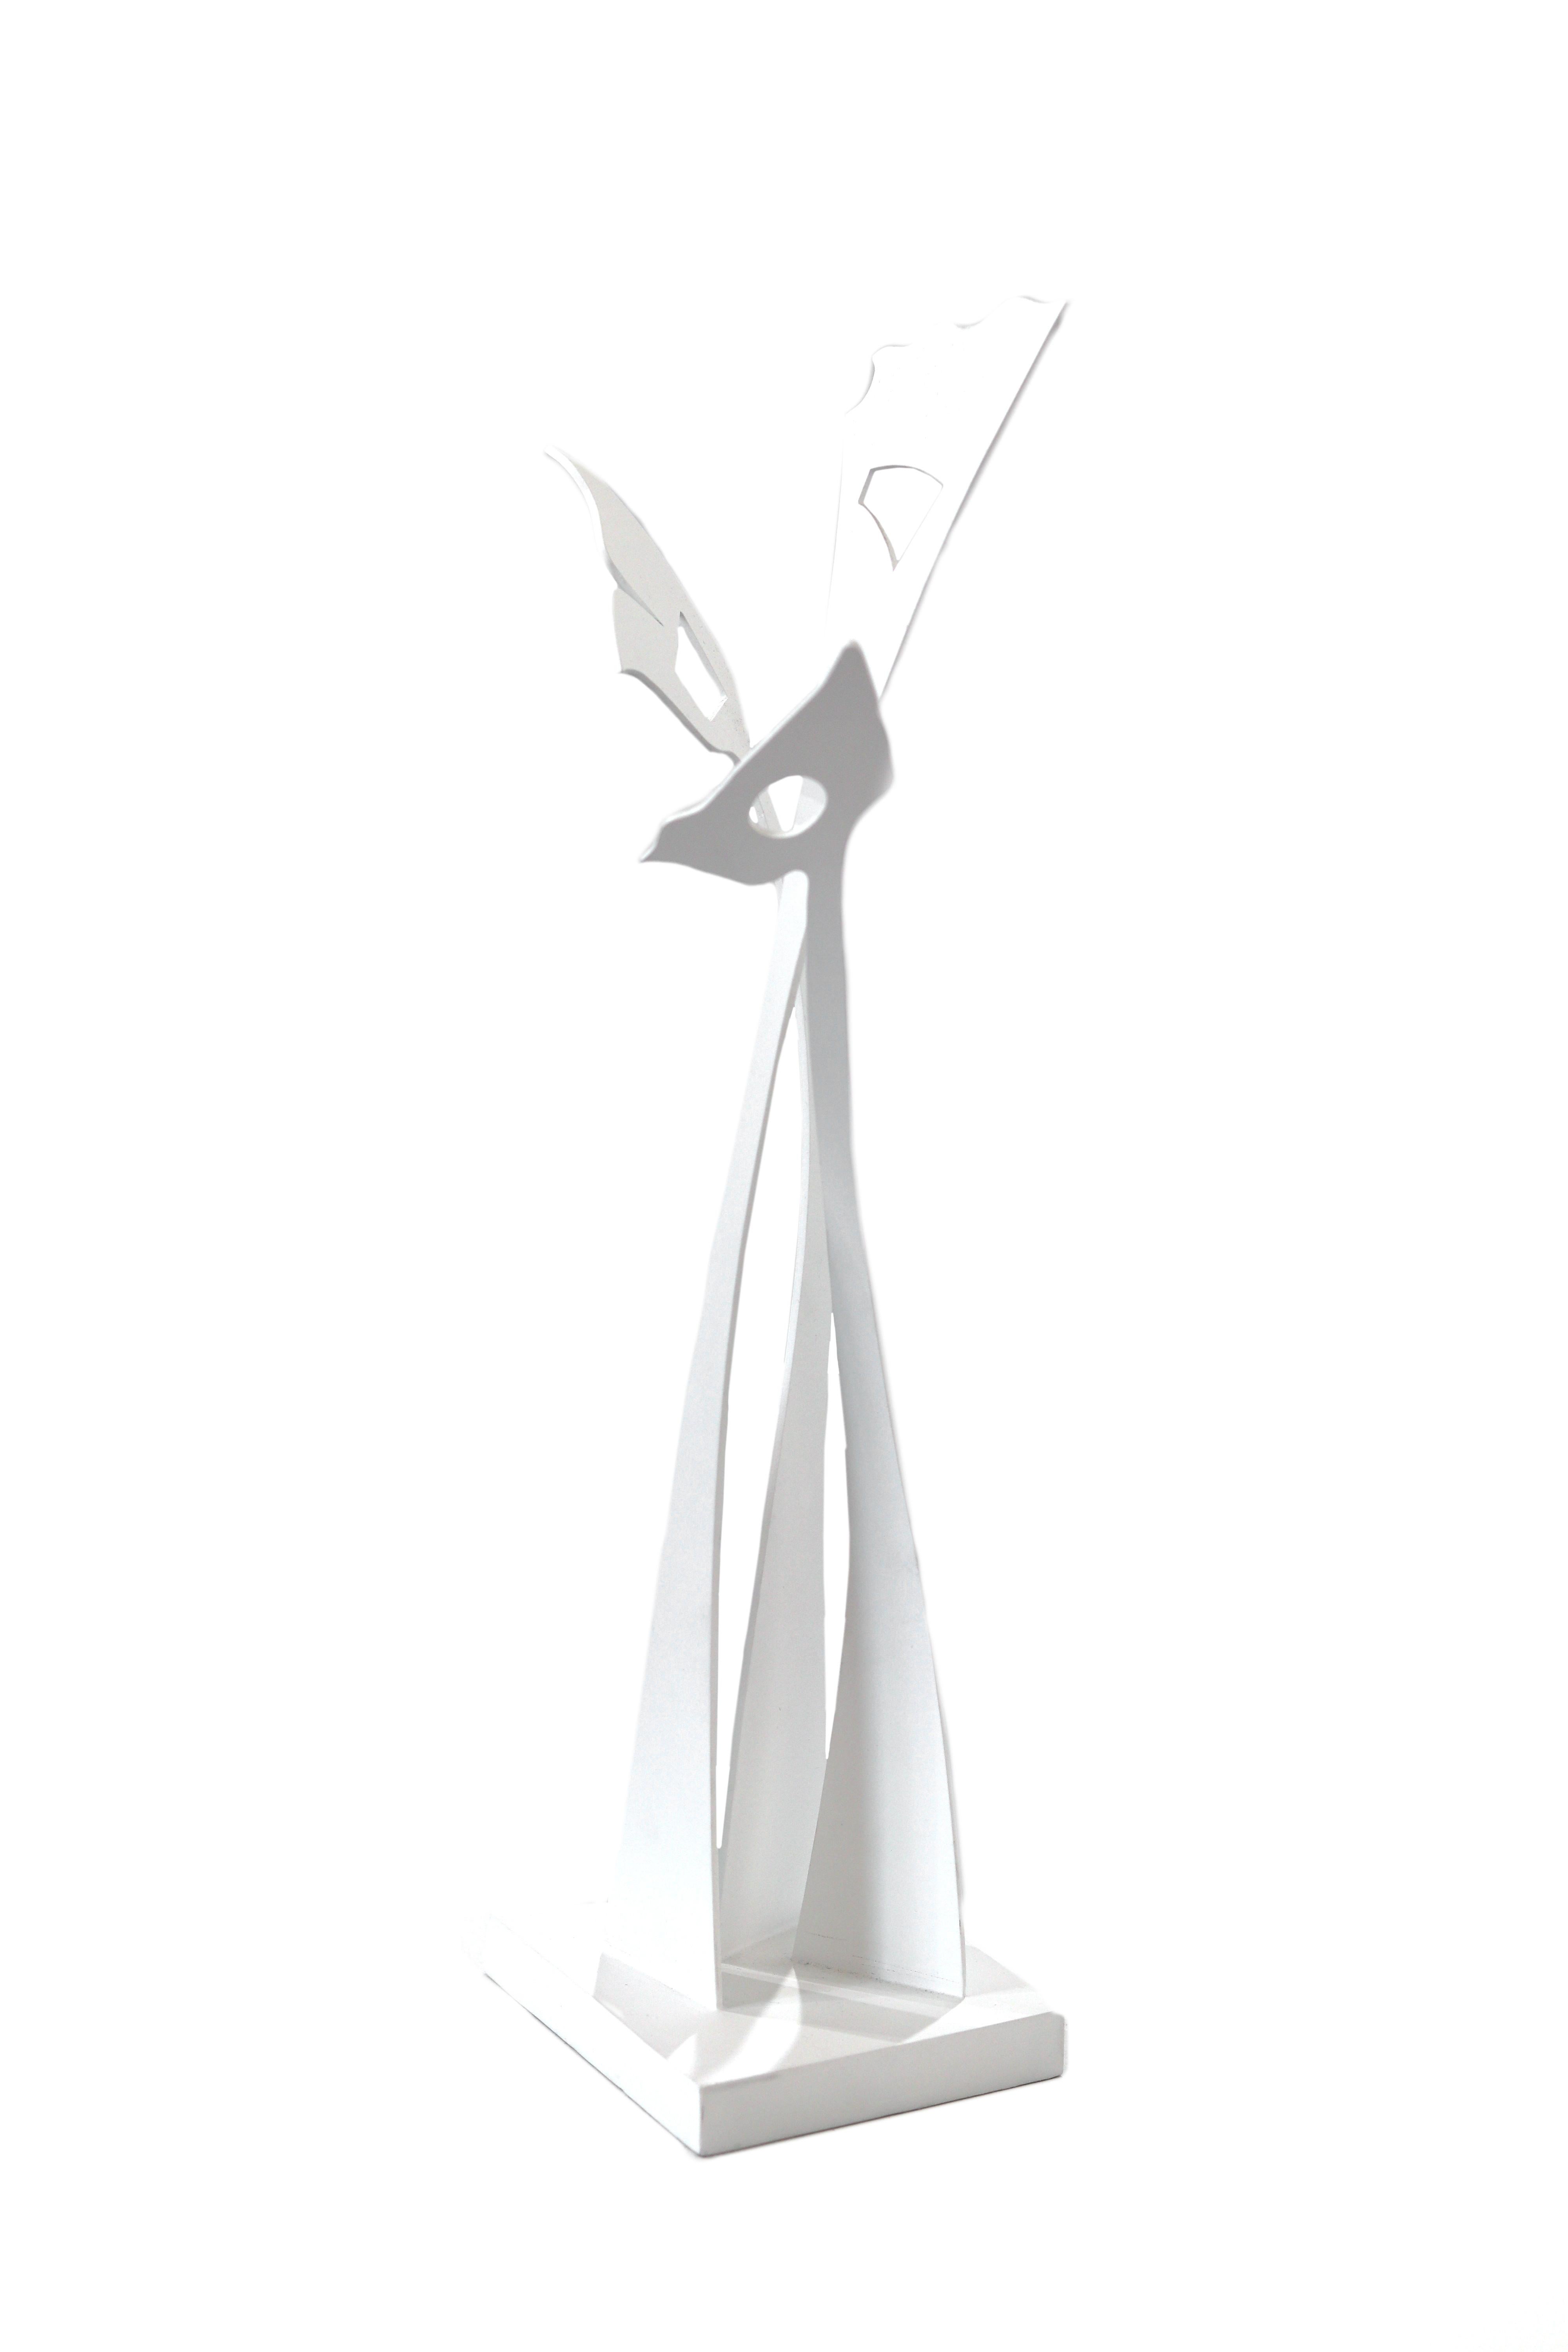 Patricia Corredor Abstract Sculpture - White Metal Minimalist Flowers Sculpture "In The Garden I Give You Life"